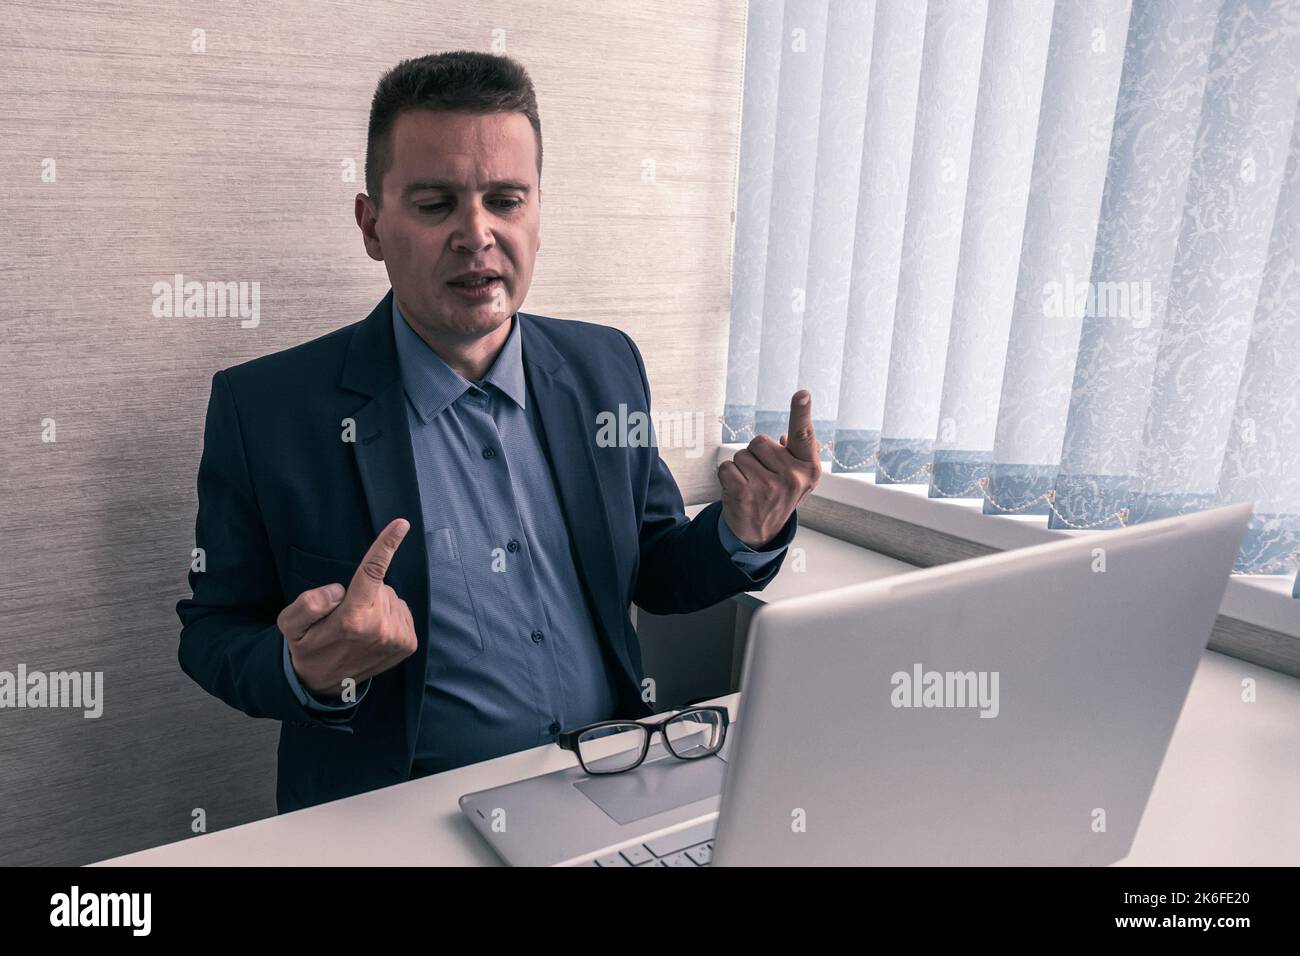 Annoyed mad businessman wearing suit frustrated with online problem, angry stressed male professional using laptop outraged by broken pc, crazy about Stock Photo